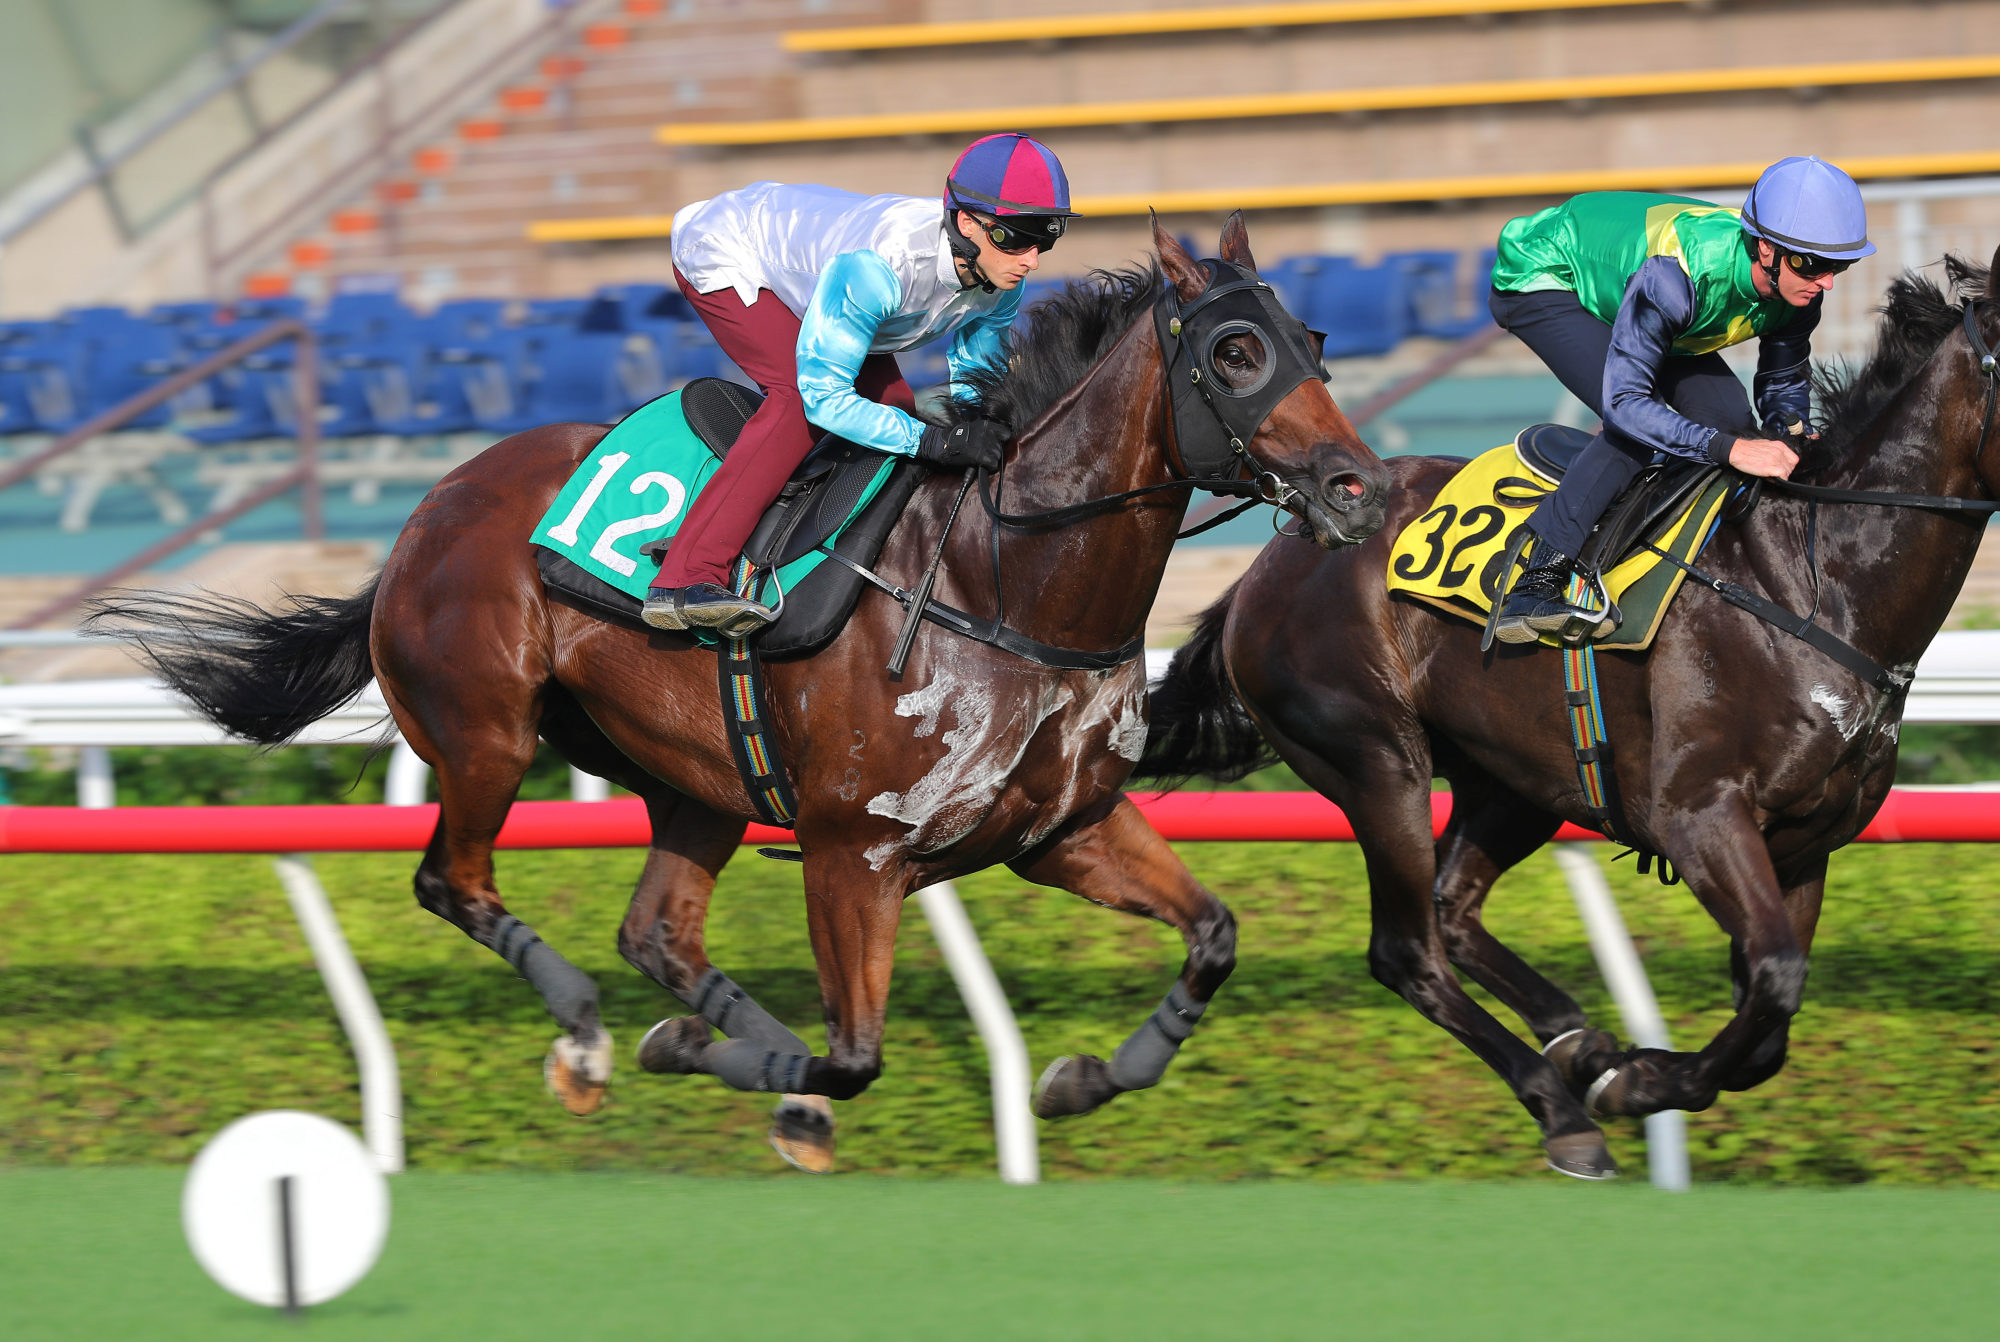 South African jockey Lyle Hewitson rides One For All (left) in his Sha Tin trial over 1,000m on September 4.